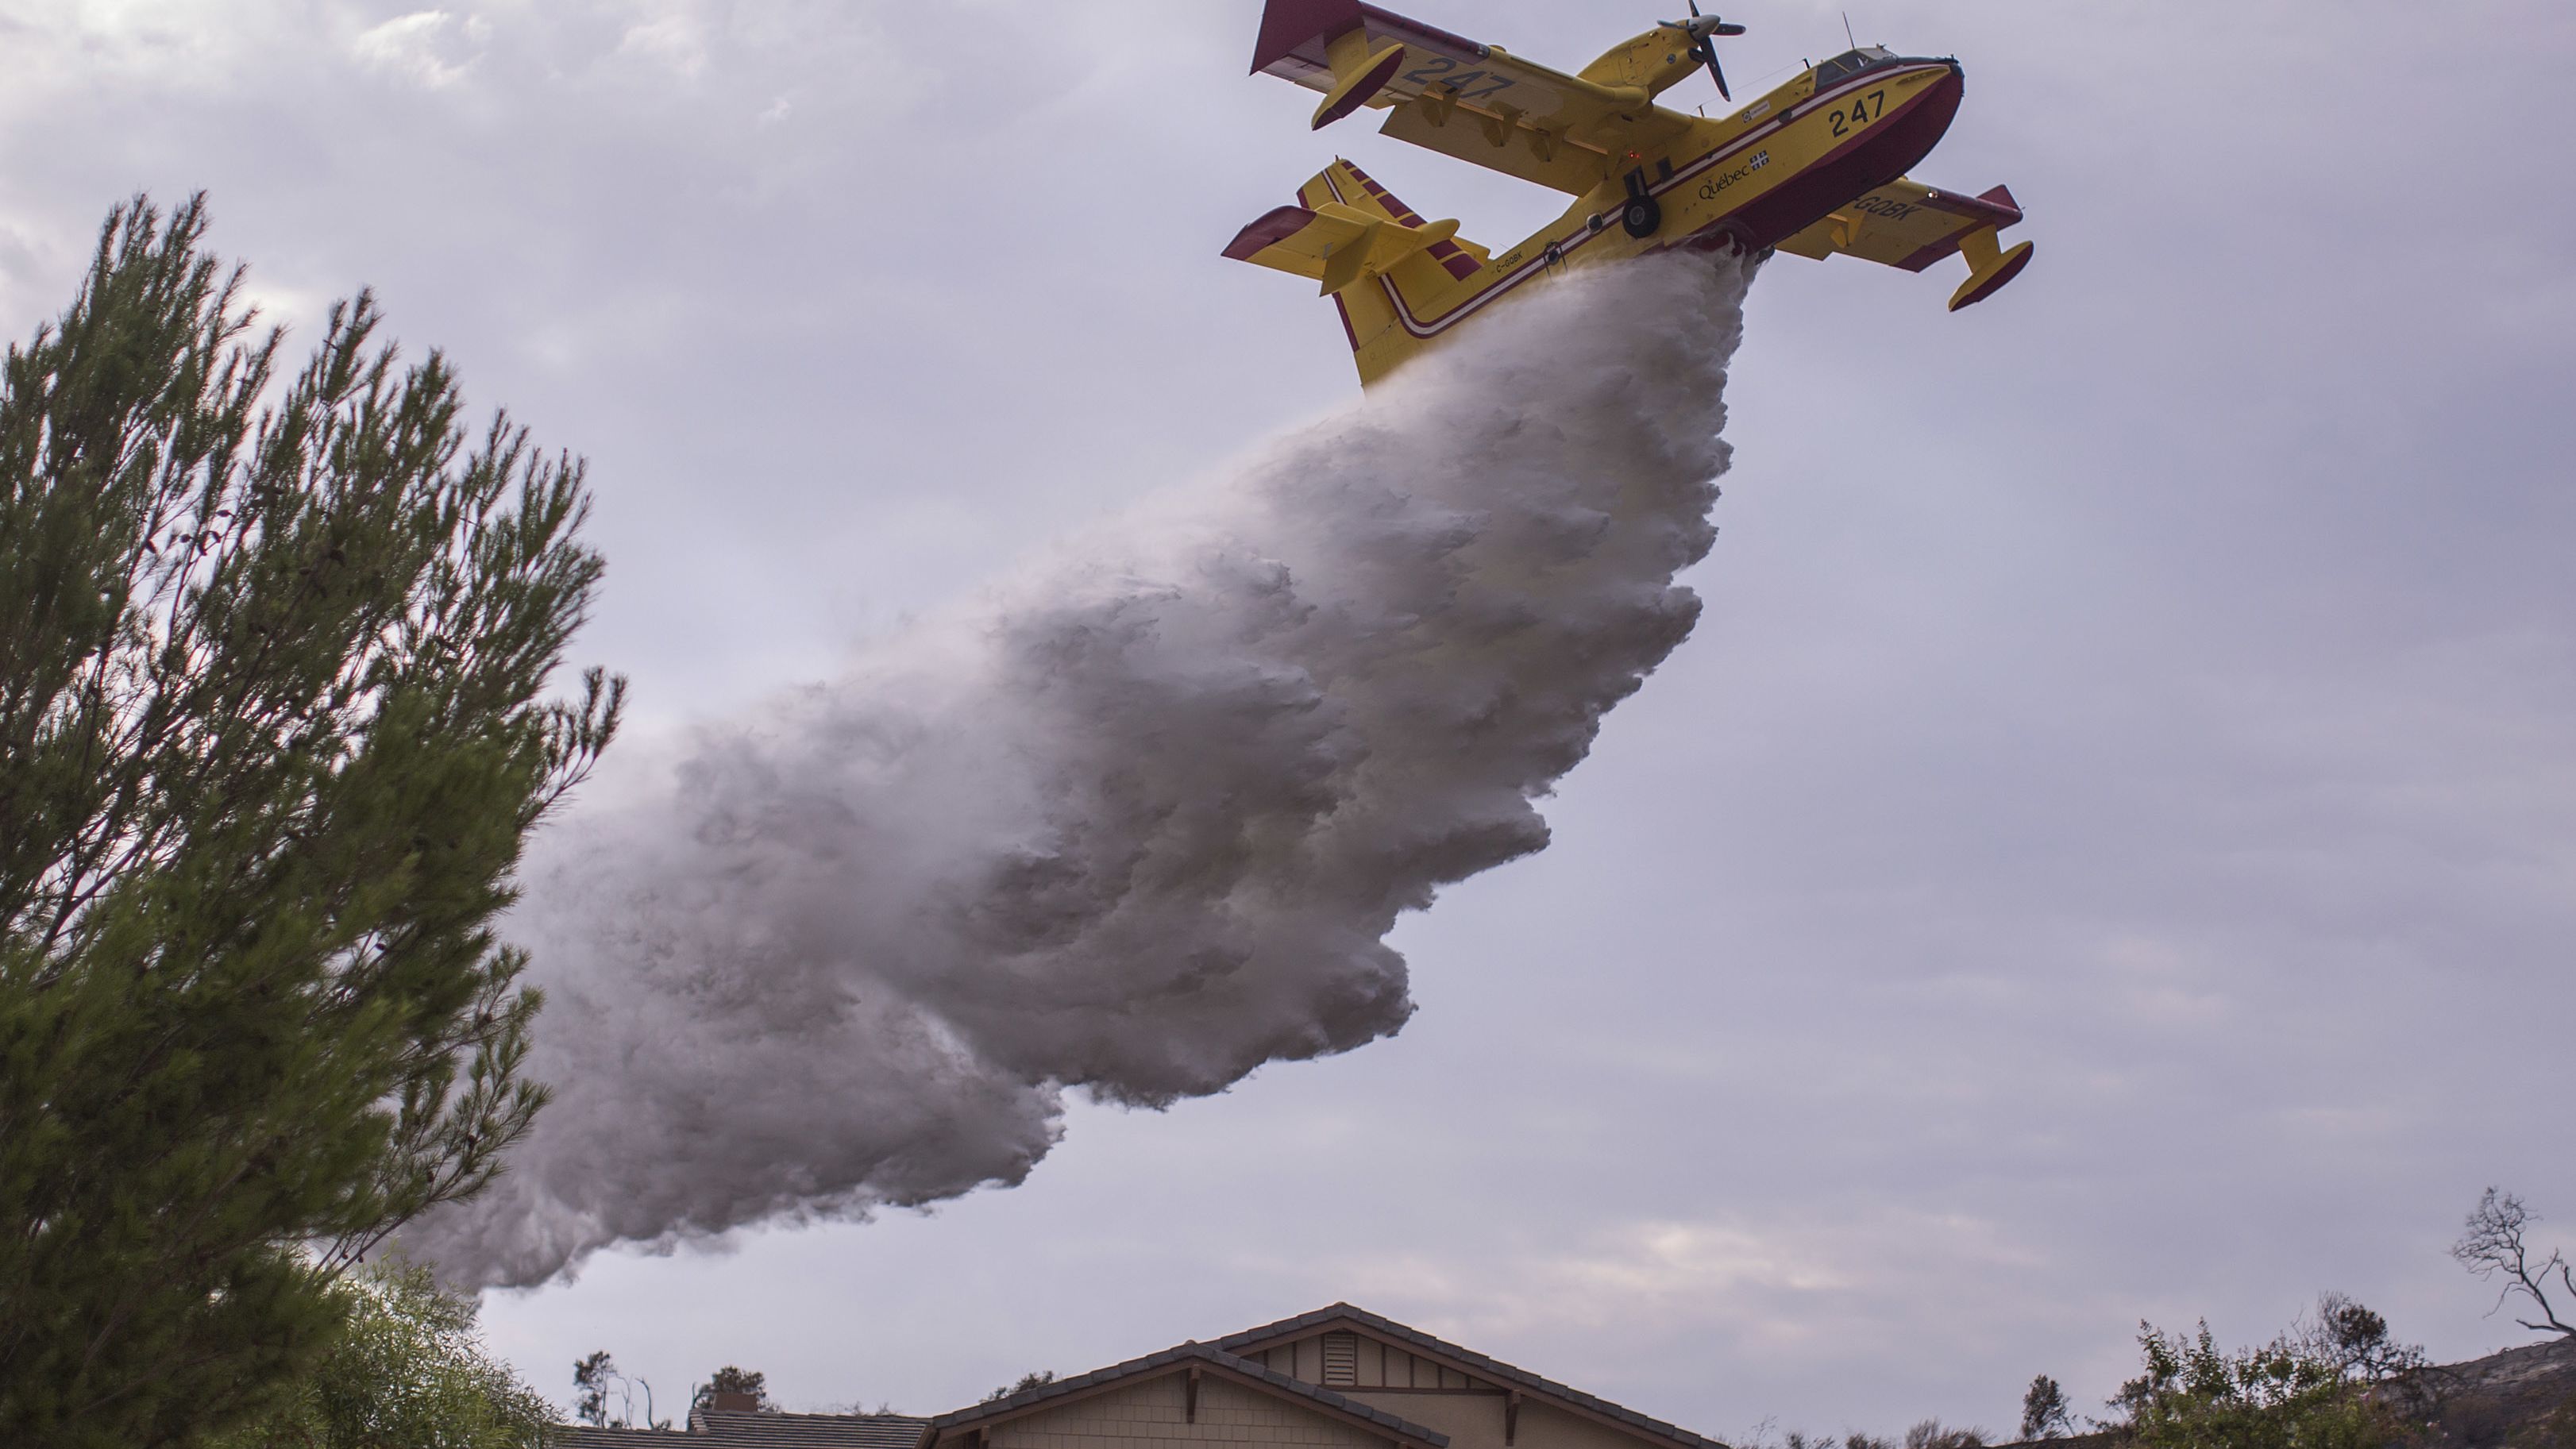 A Super Scooper CL-415 firefighting aircraft from Canada is helping protect homes.